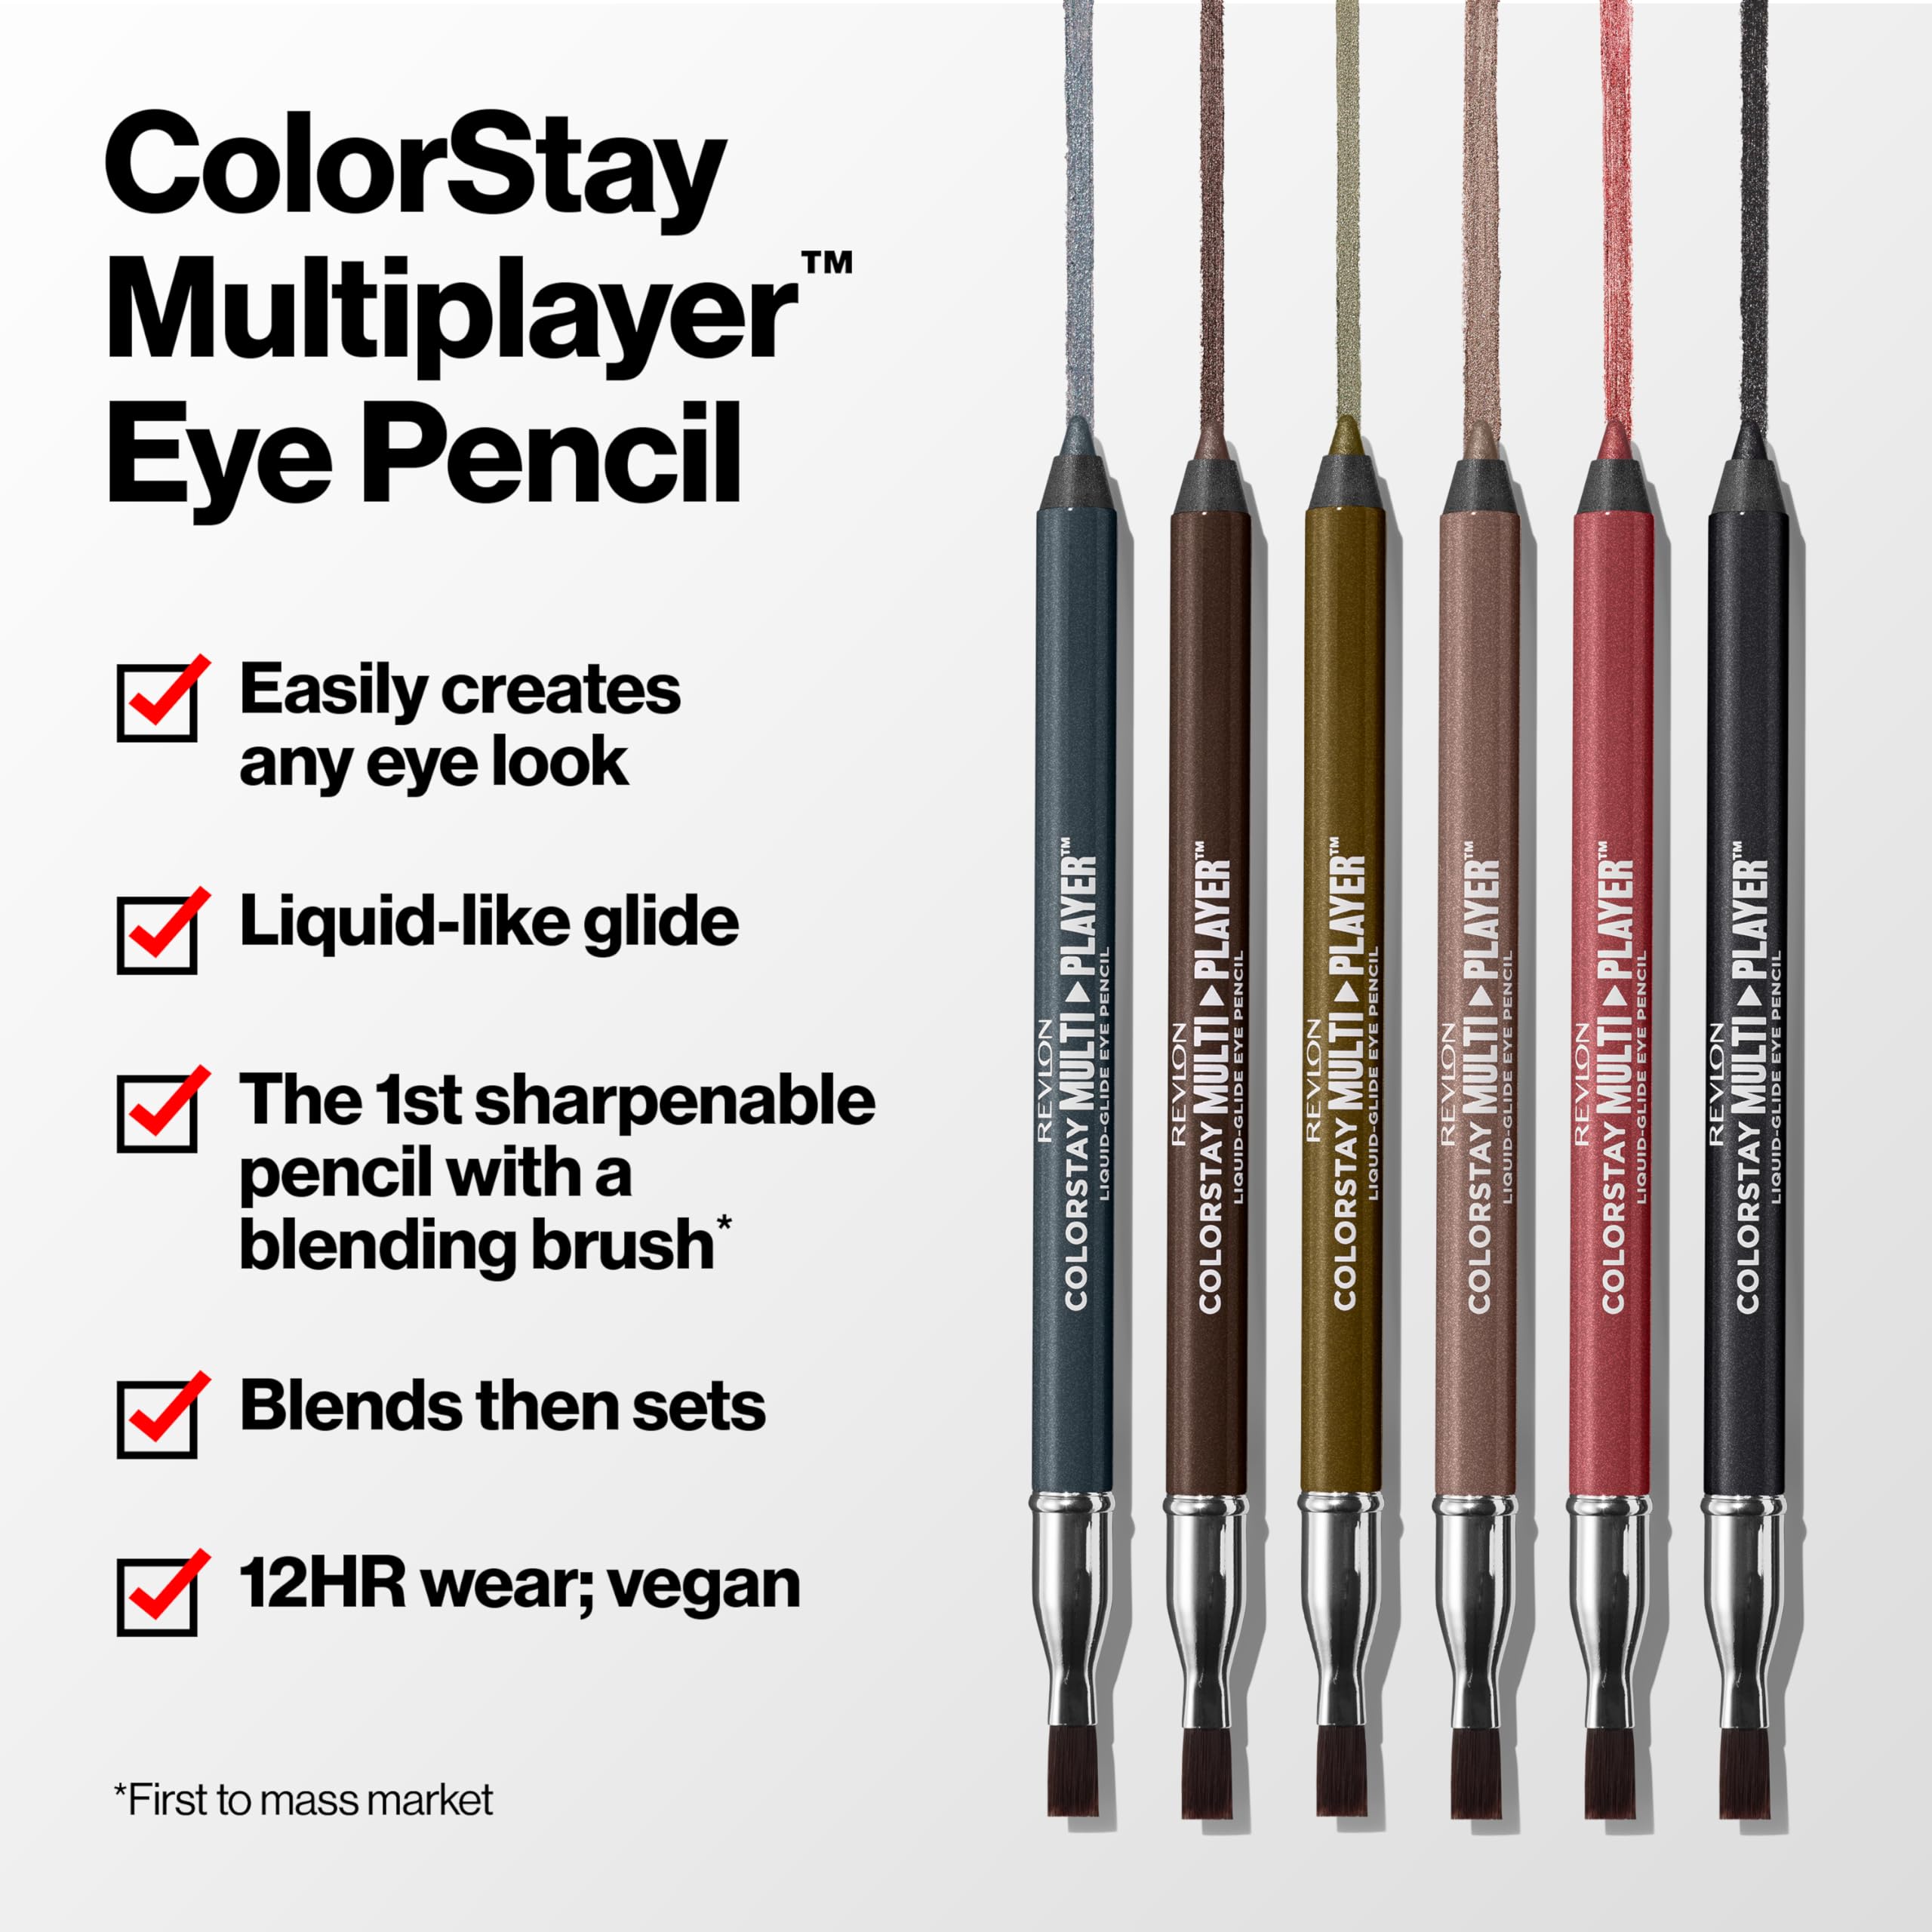 REVLON ColorStay Multiplayer Liquid-Glide Eye Pencil, Multi-Use Eye Makeup With Blending Brush, Blends Then Sets, Creamy Texture, Waterproof, Smudge-proof, Longwearing, 401 Checkmate, 0.03 oz